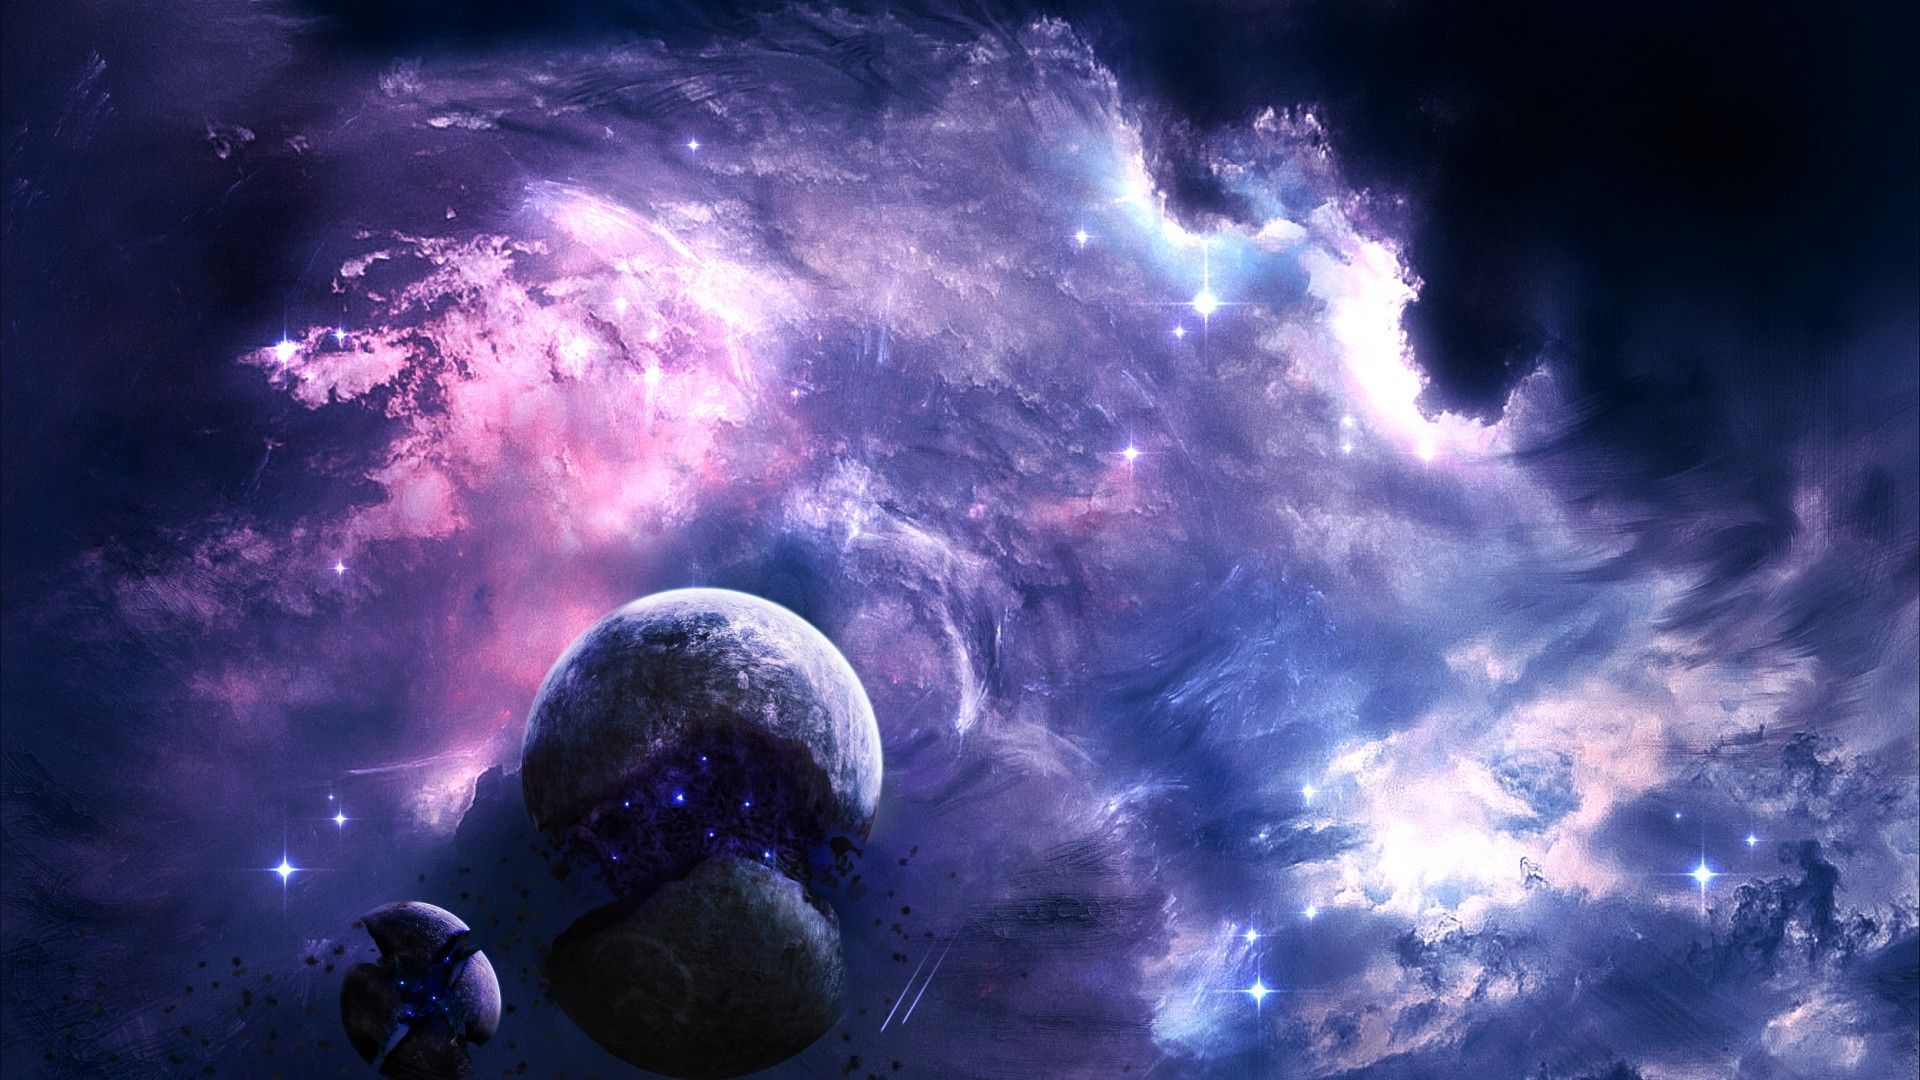 Real Space Wallpaper High Resolution #0pv3 > Mbuh.xyz